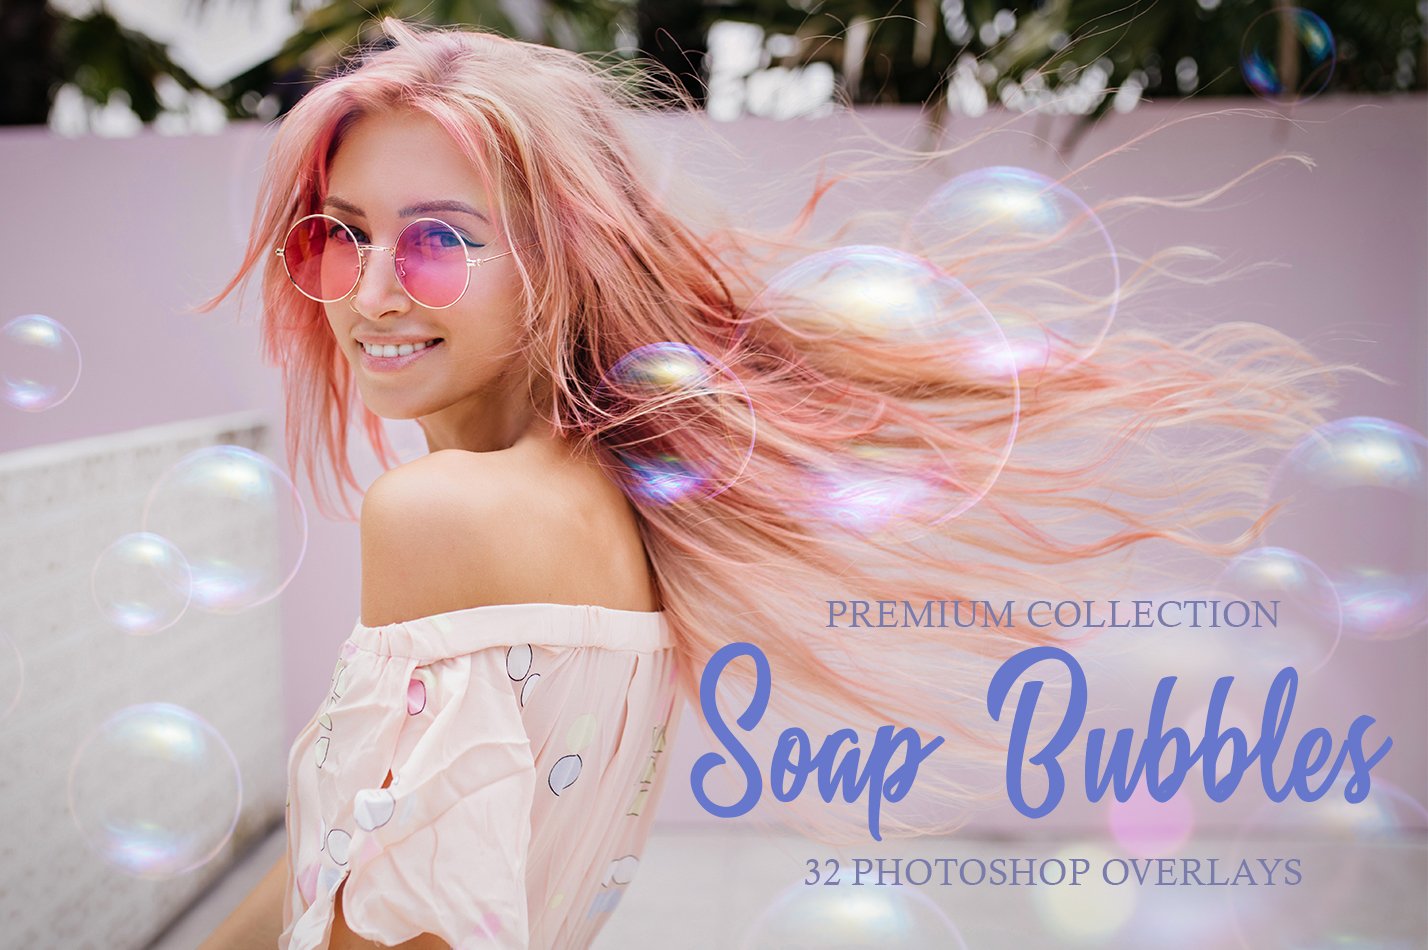 Soap Bubbles Photoshop Overlayscover image.